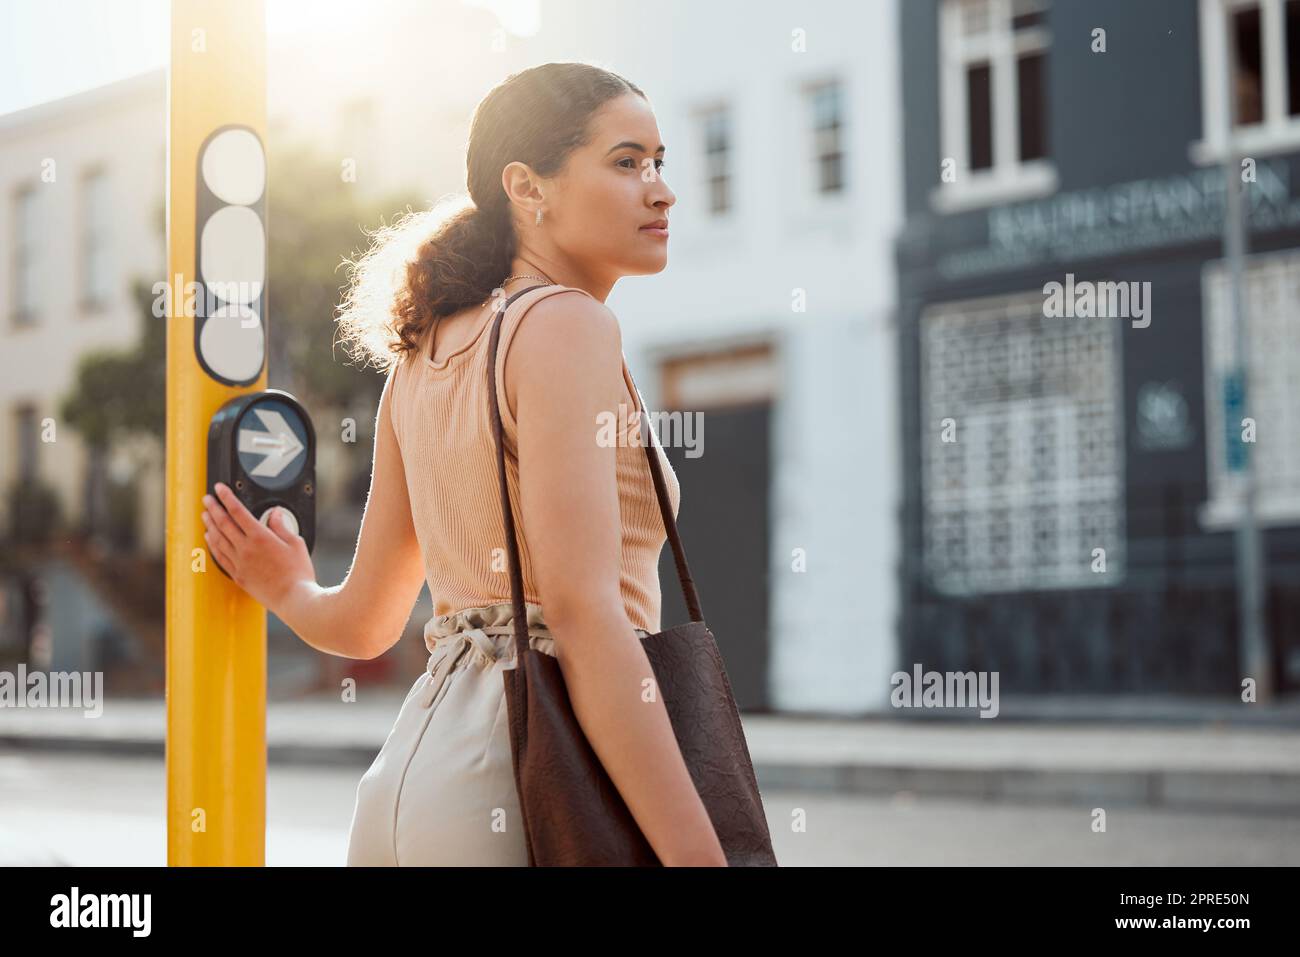 Attractive female pedestrian ready to cross the street, waiting for green light and pressing the button at a crossing Young city woman on a morning walk to work, standing and looking out for traffic. Stock Photo